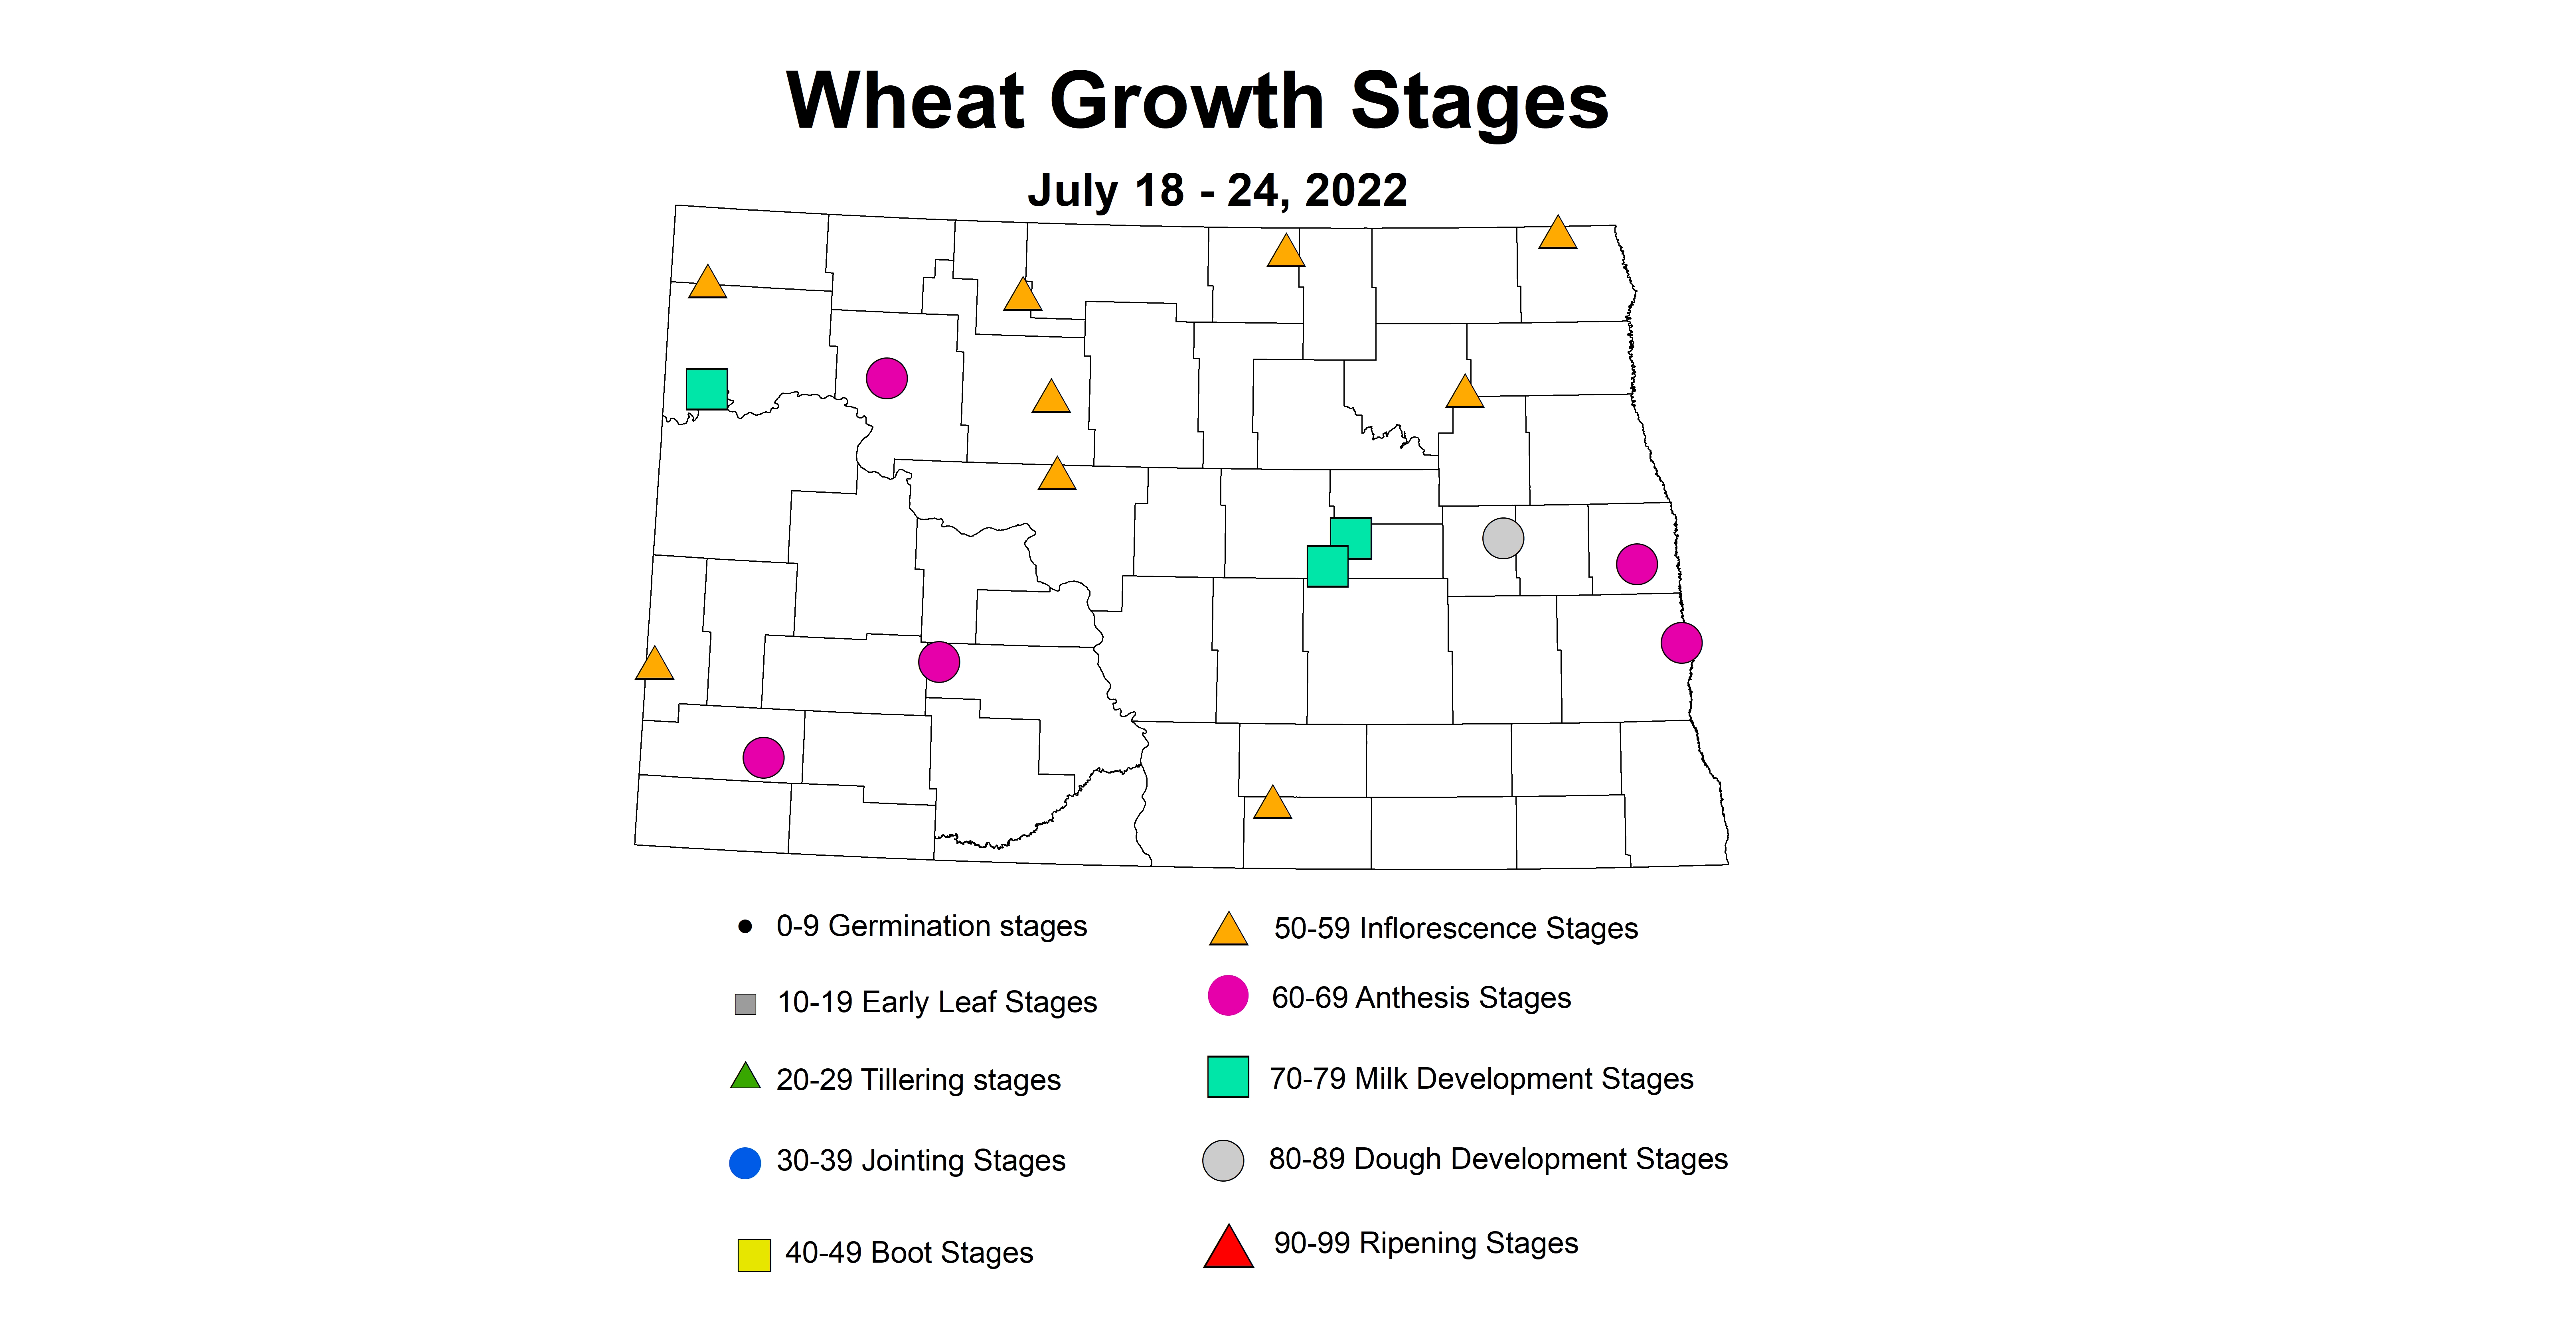 wheat growth stages 2022 7.18-7.24